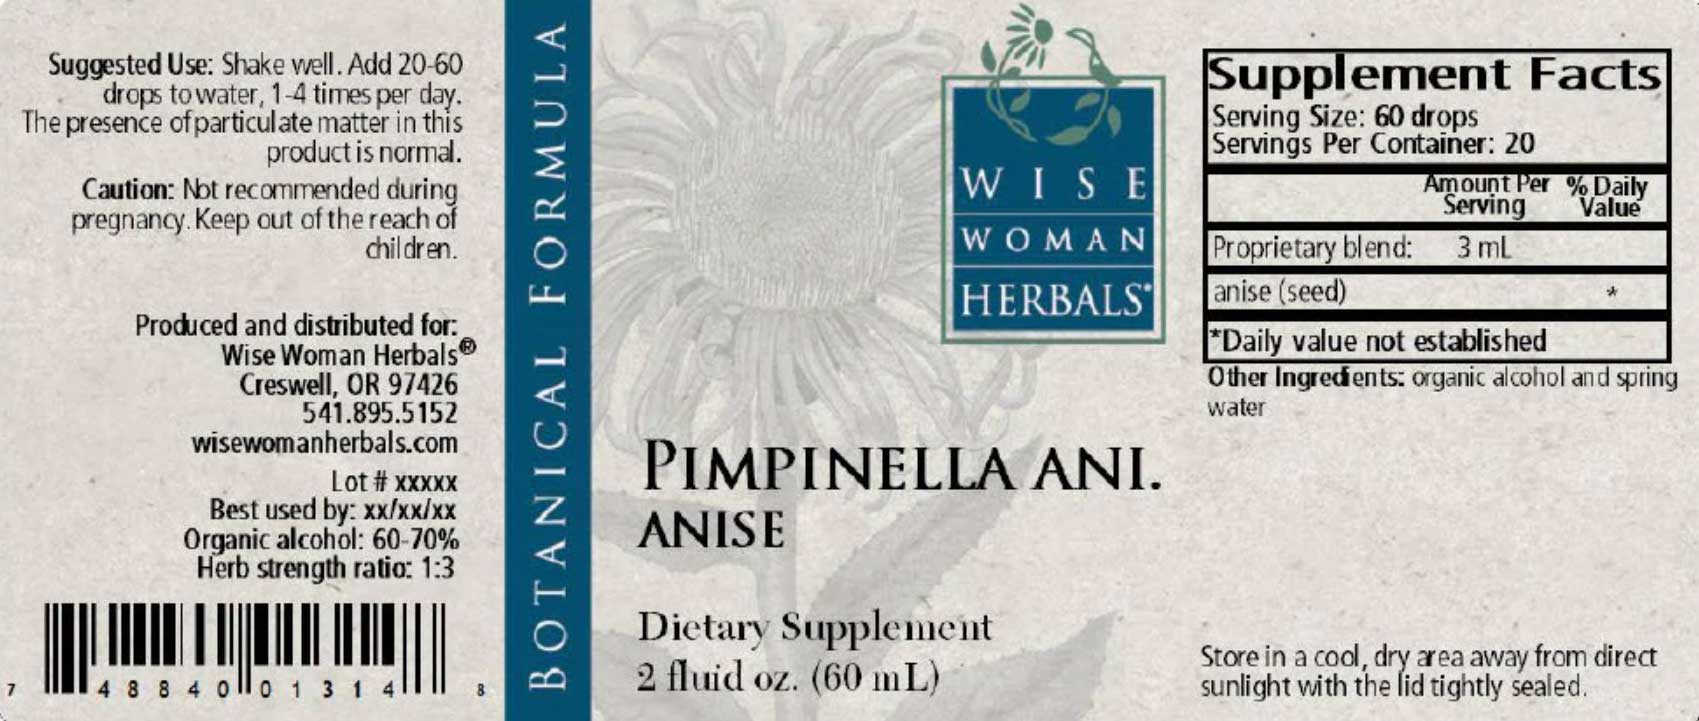 Wise Woman Herbals Pimpinella Anisum Anise Label